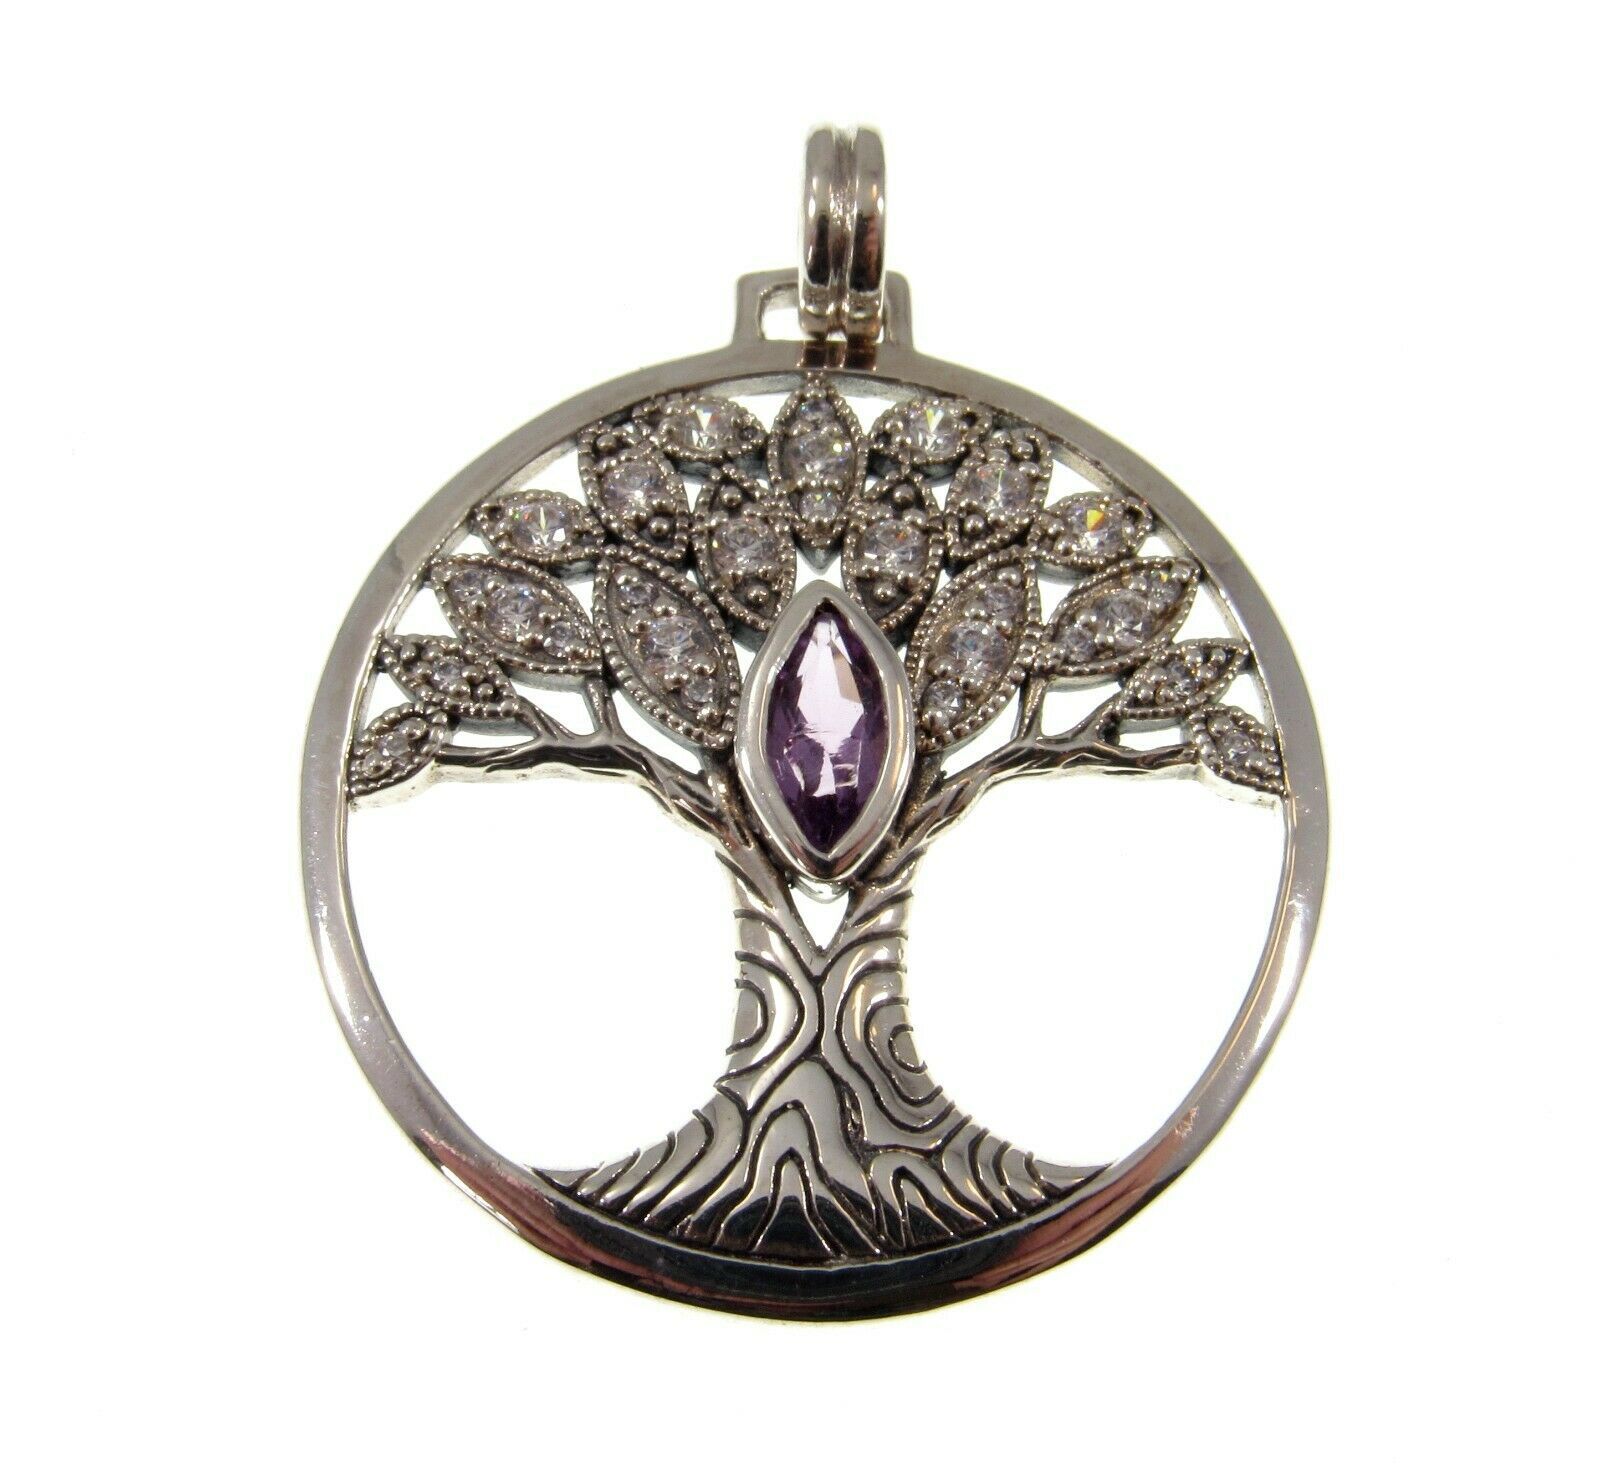 Solid 925 Sterling Silver Wondrous Tree of Life Pendant With Faceted Gemstone